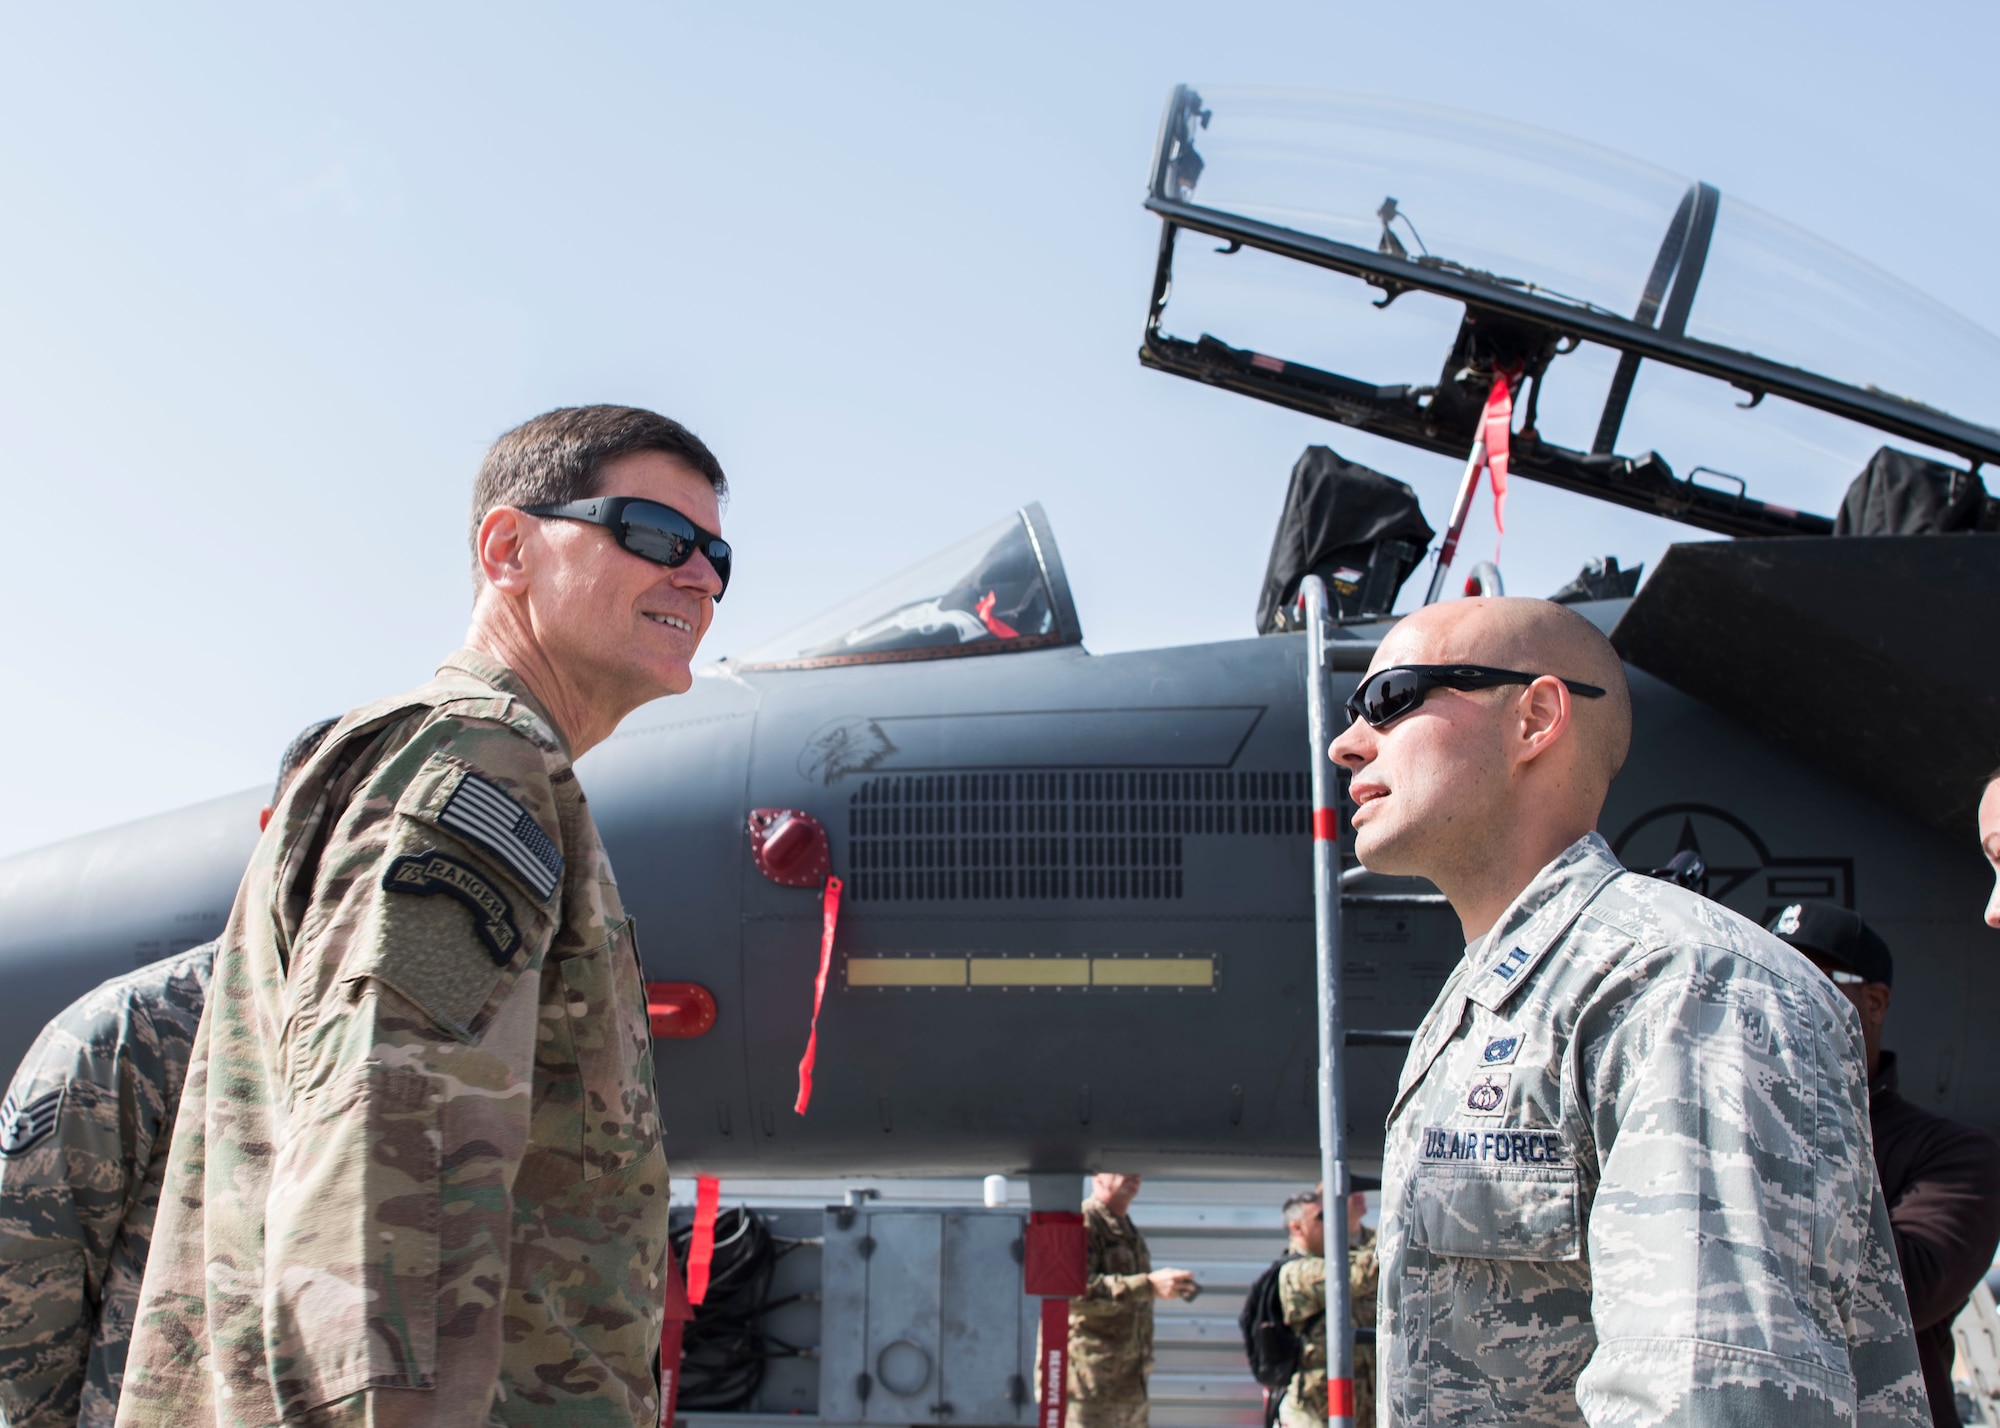 Gen. Joseph Votel, U. S. Central Command commander, receives a brief from Capt. Sheppard, 389th Aircraft Maintenance Unit officer in-charge, at an undisclosed location in Southwest Asia, Feb. 23, 2017. The general is the commander of all down-range operations in the 20-country inclusive central region in the Middle East. (U.S. Air Force photo/Staff Sgt. Eboni Reams)